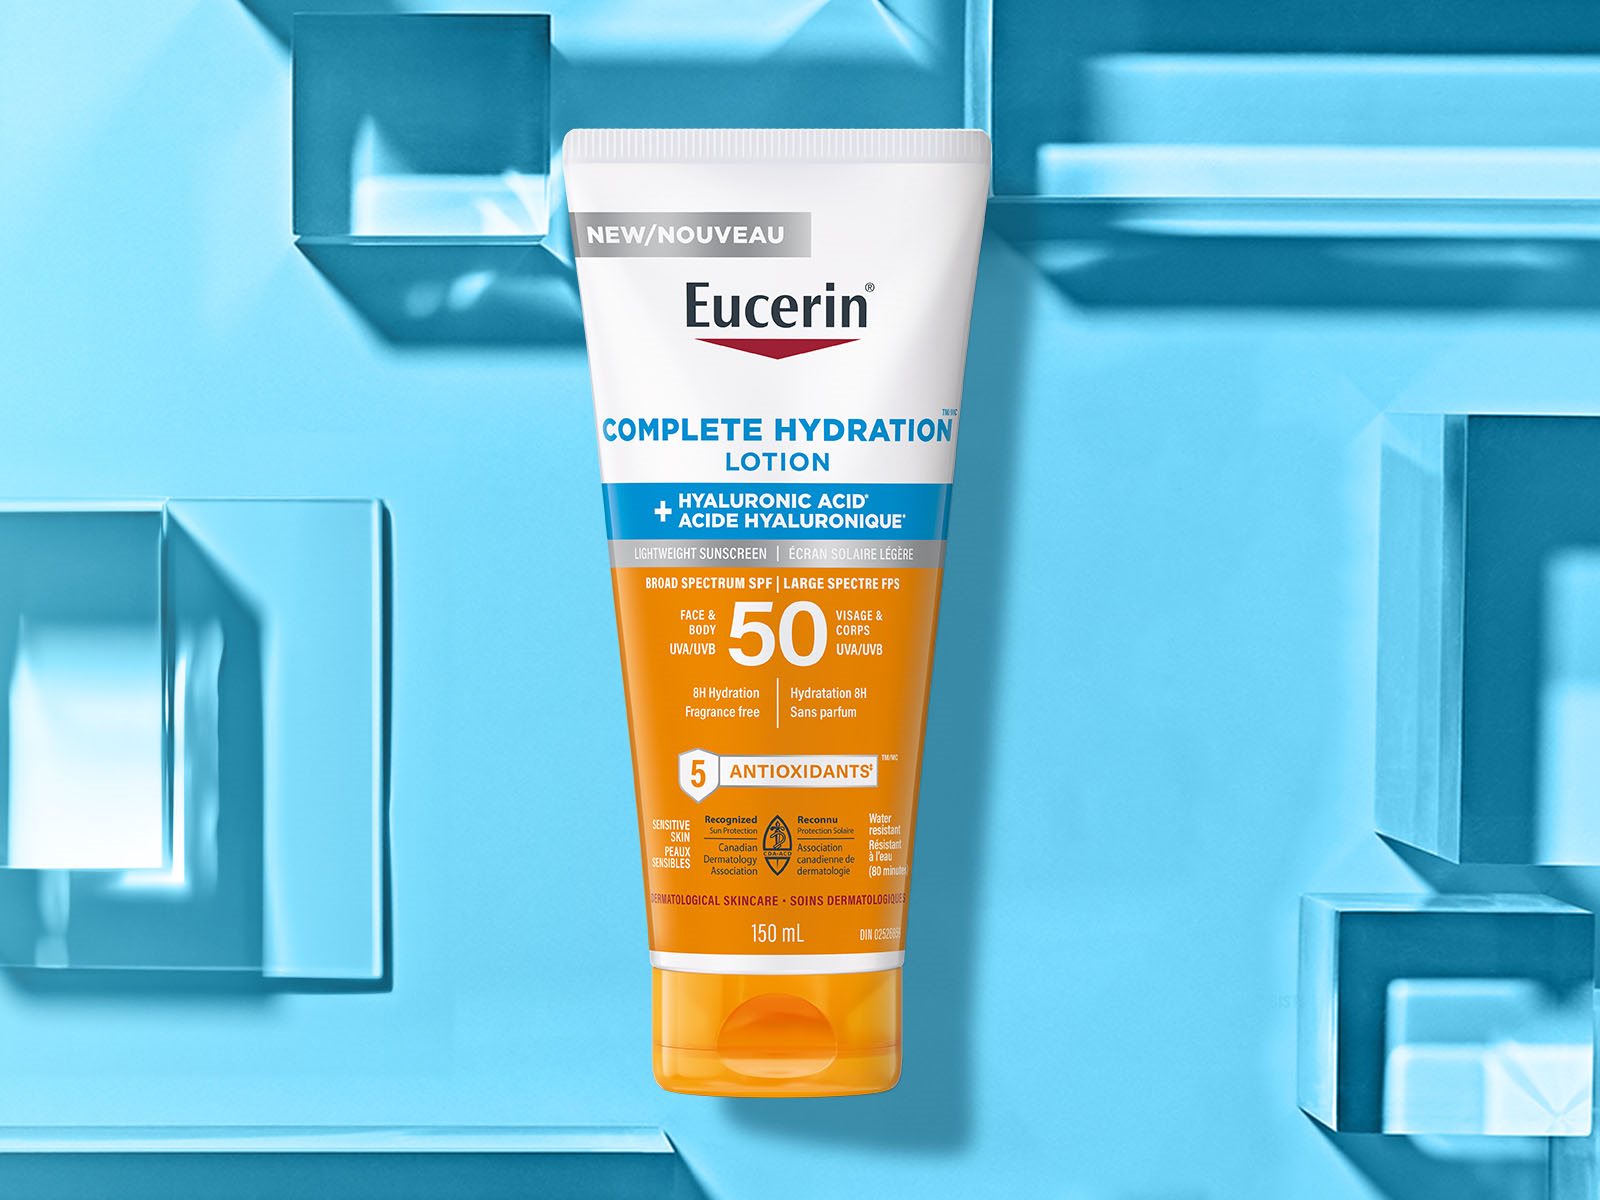 View of a Eucerin Complete Hydration Sunscreen Lotion Face & Body SPF 50 product against a blue background.